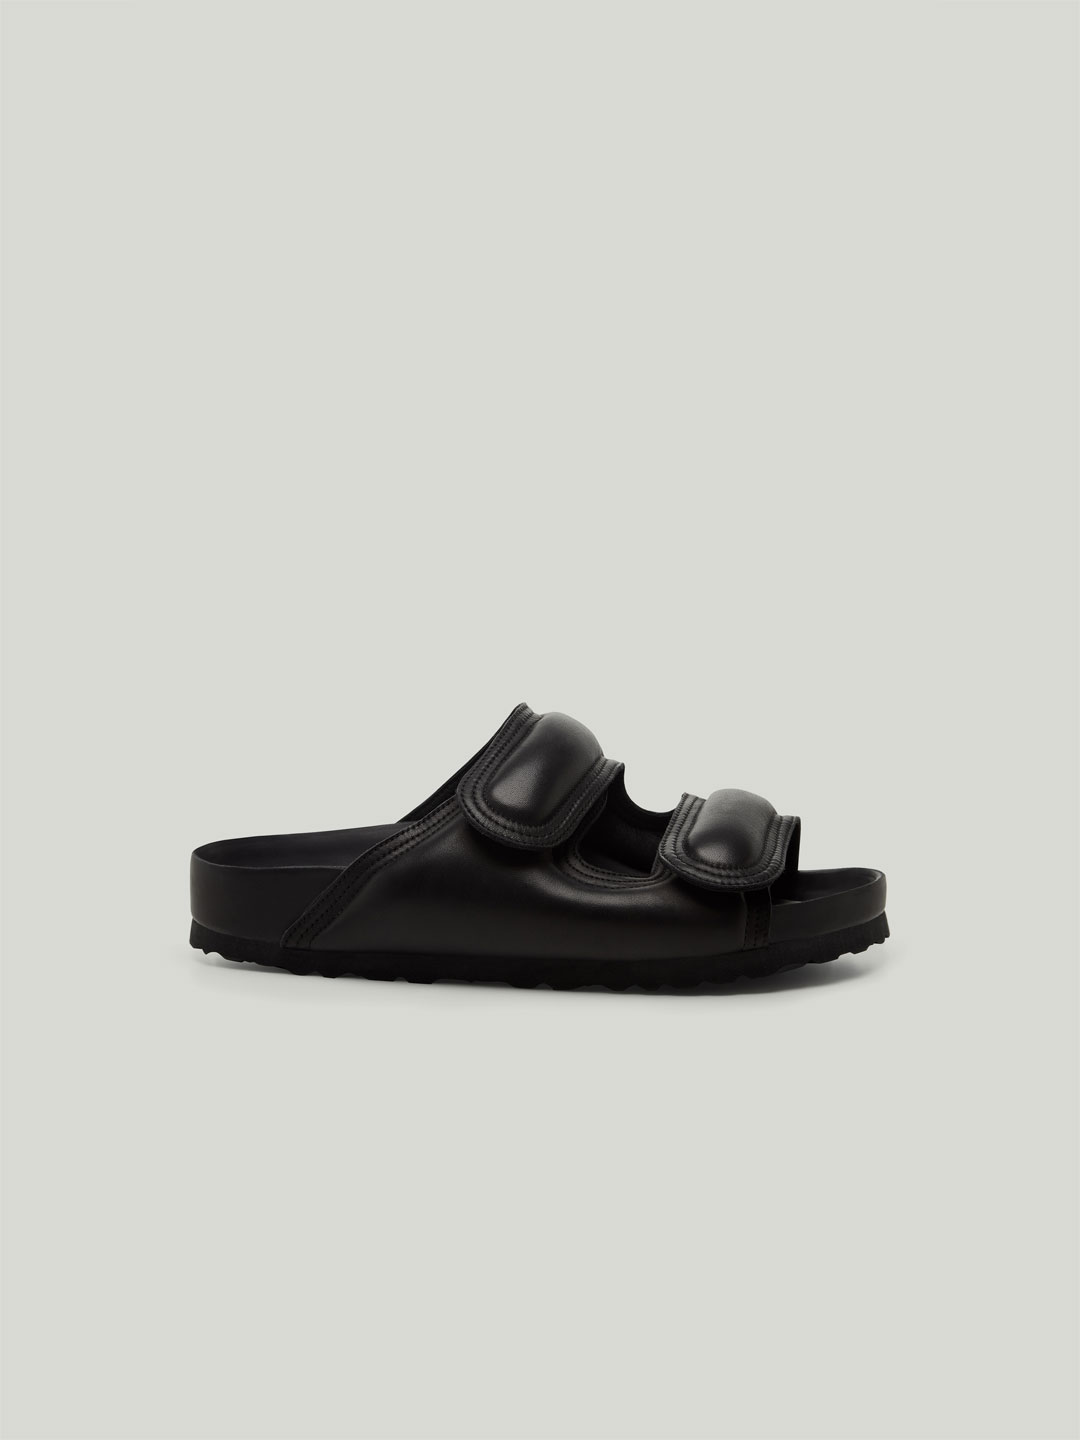 The Beach Comber Leather Sandals - Black